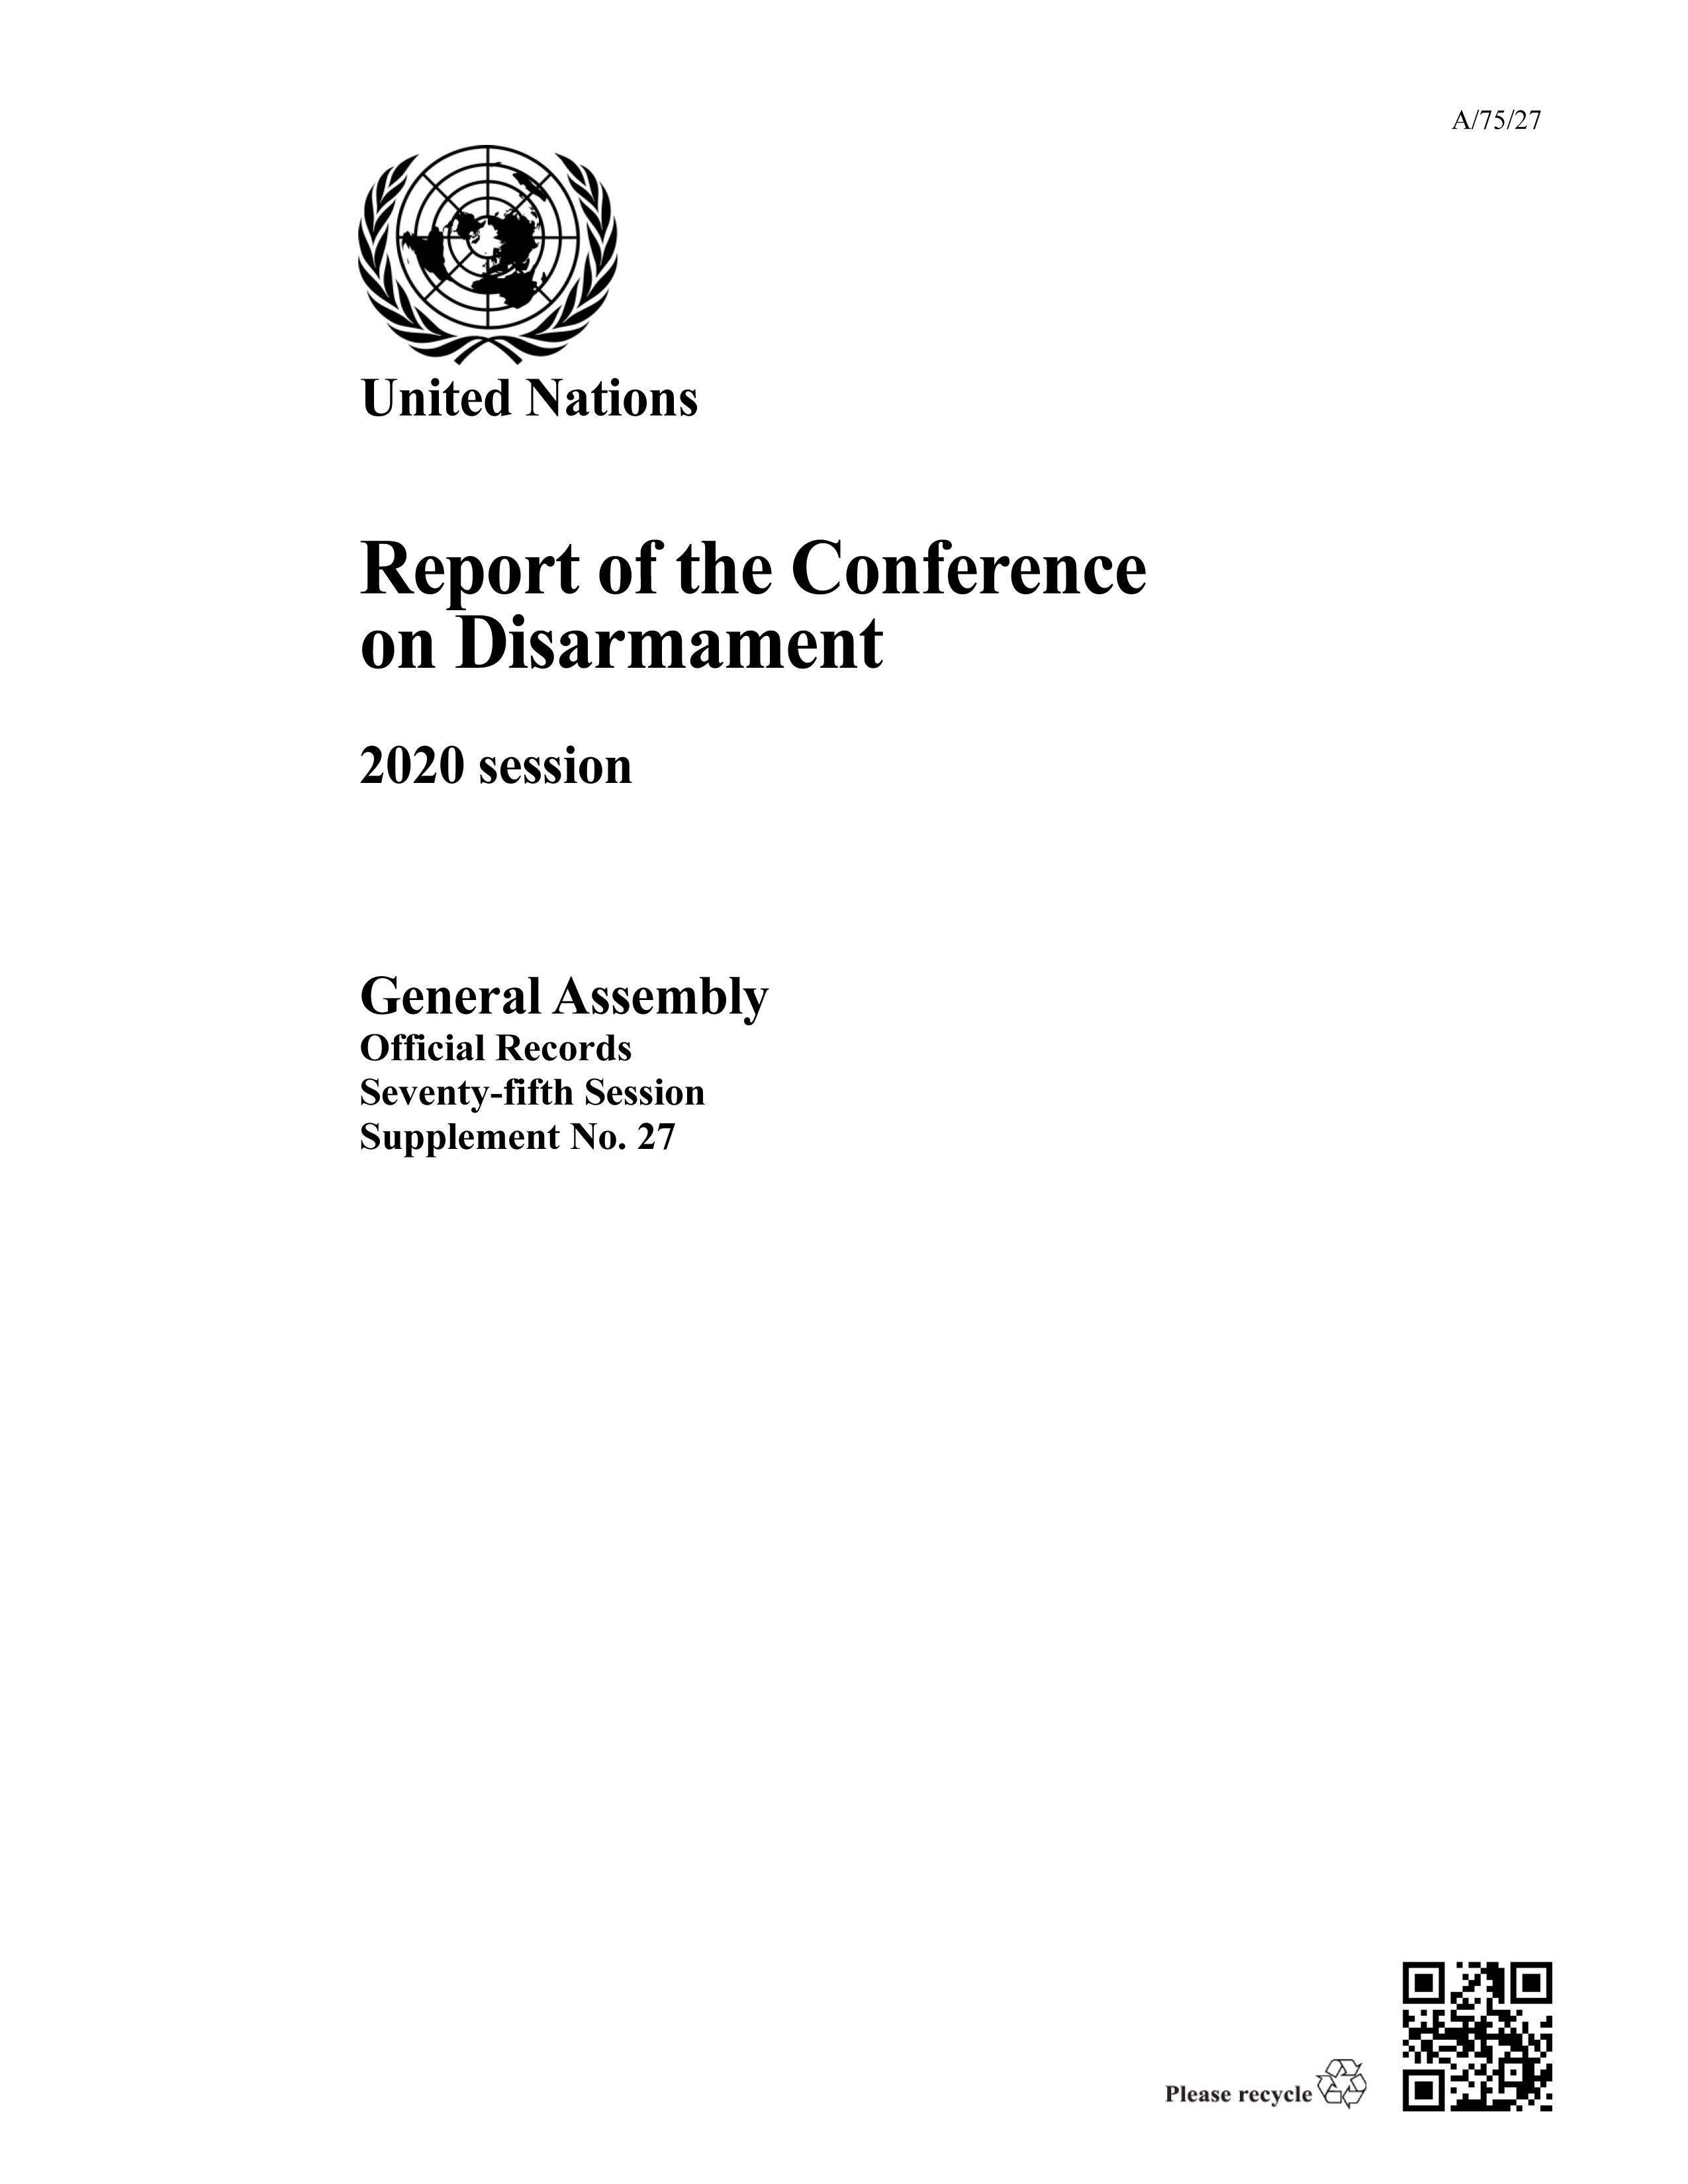 image of Report of the Conference on Disarmament: 2020 Session